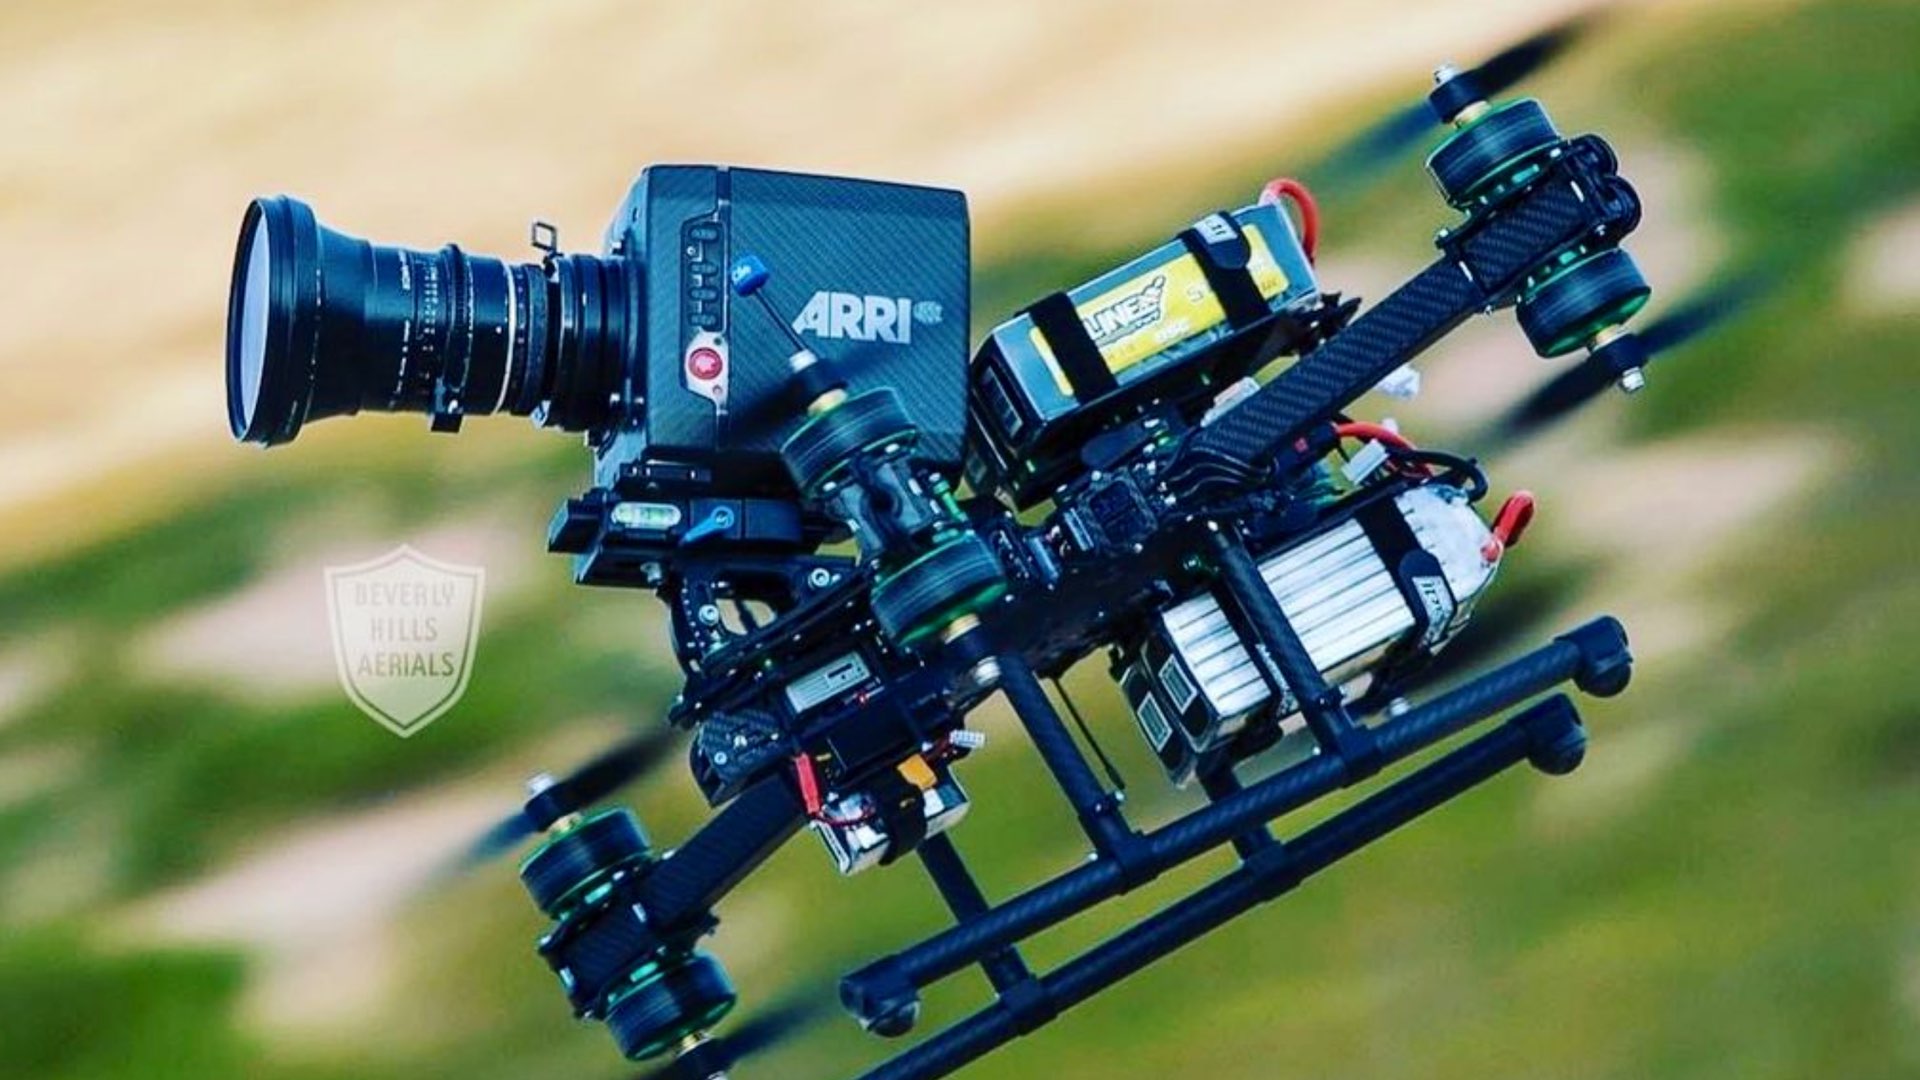 FPV Drones for Cinema Applications: The Next Trend? - YMCinema - & Insights on Cinema